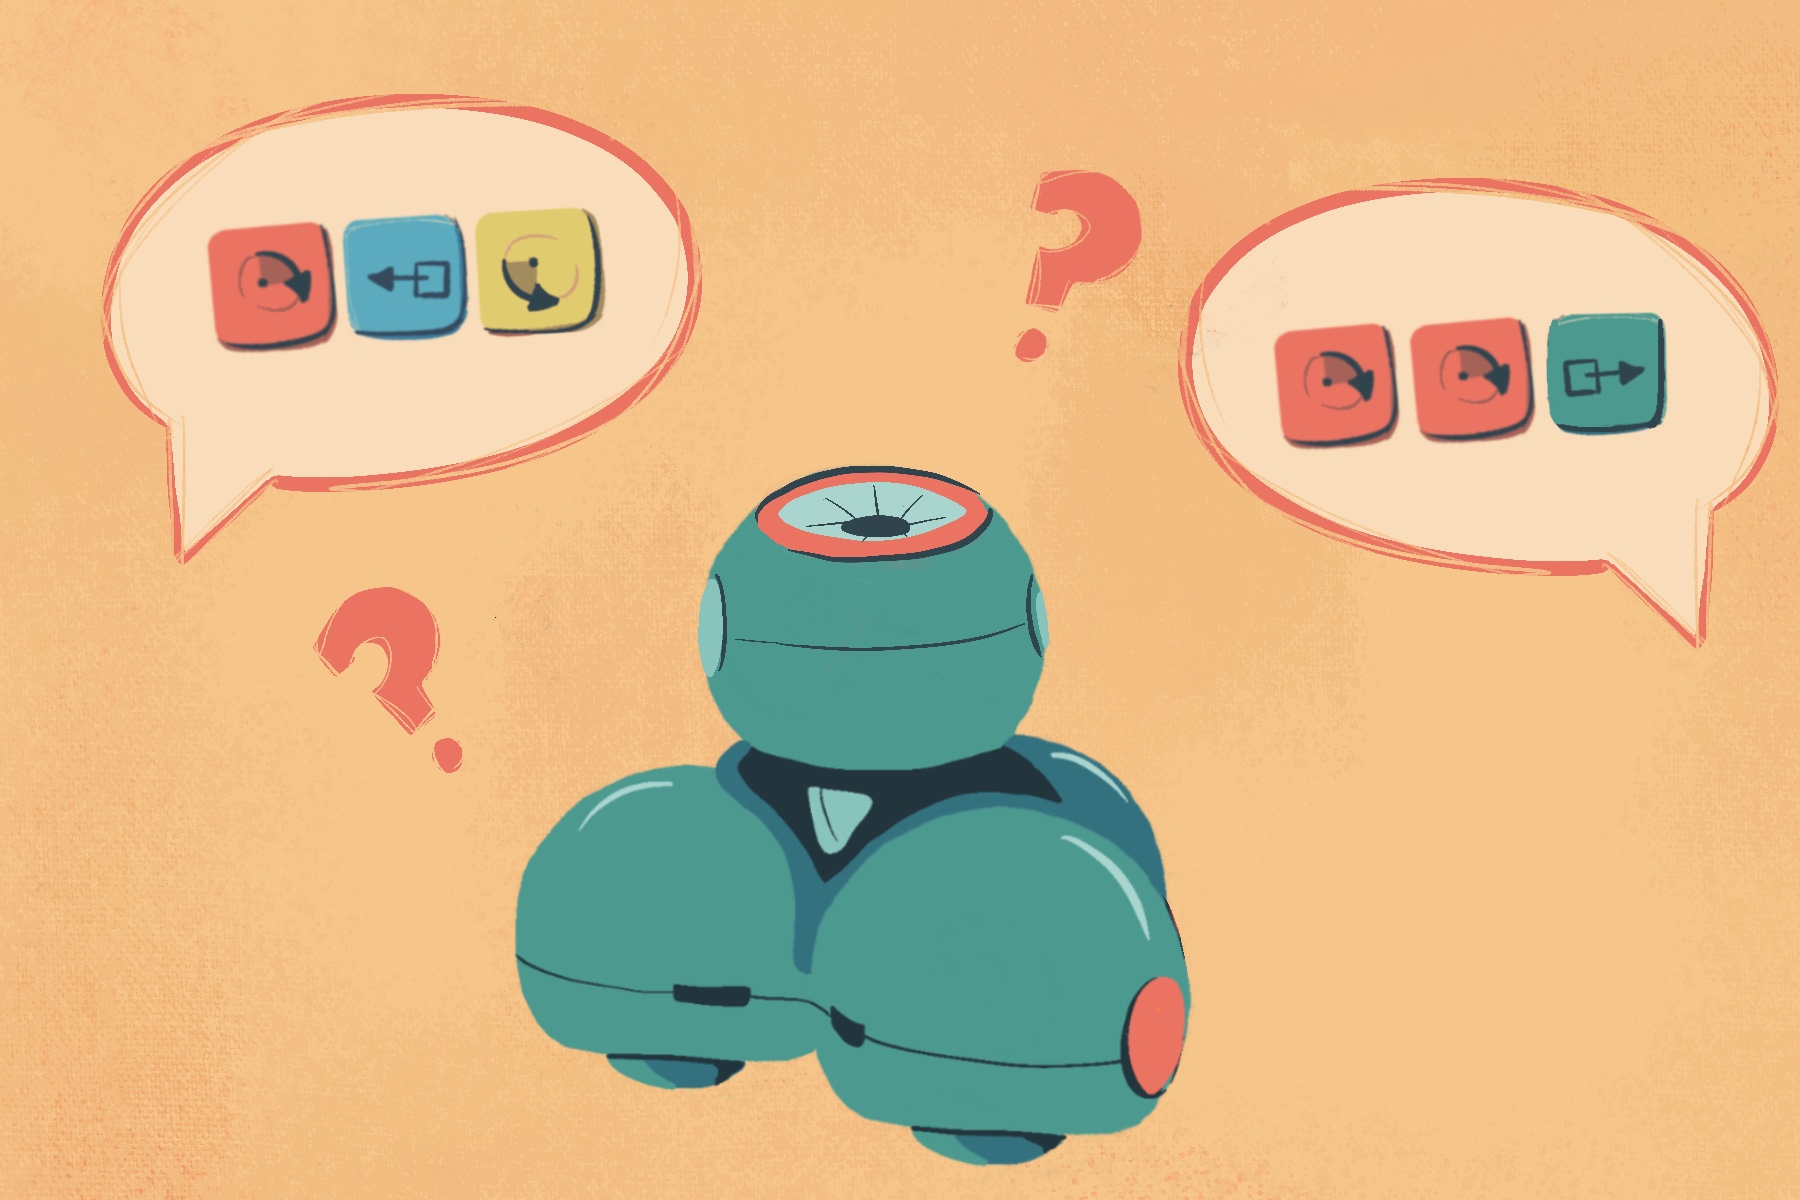 Illustration of Dash with speech bubbles of action blocks and question marks